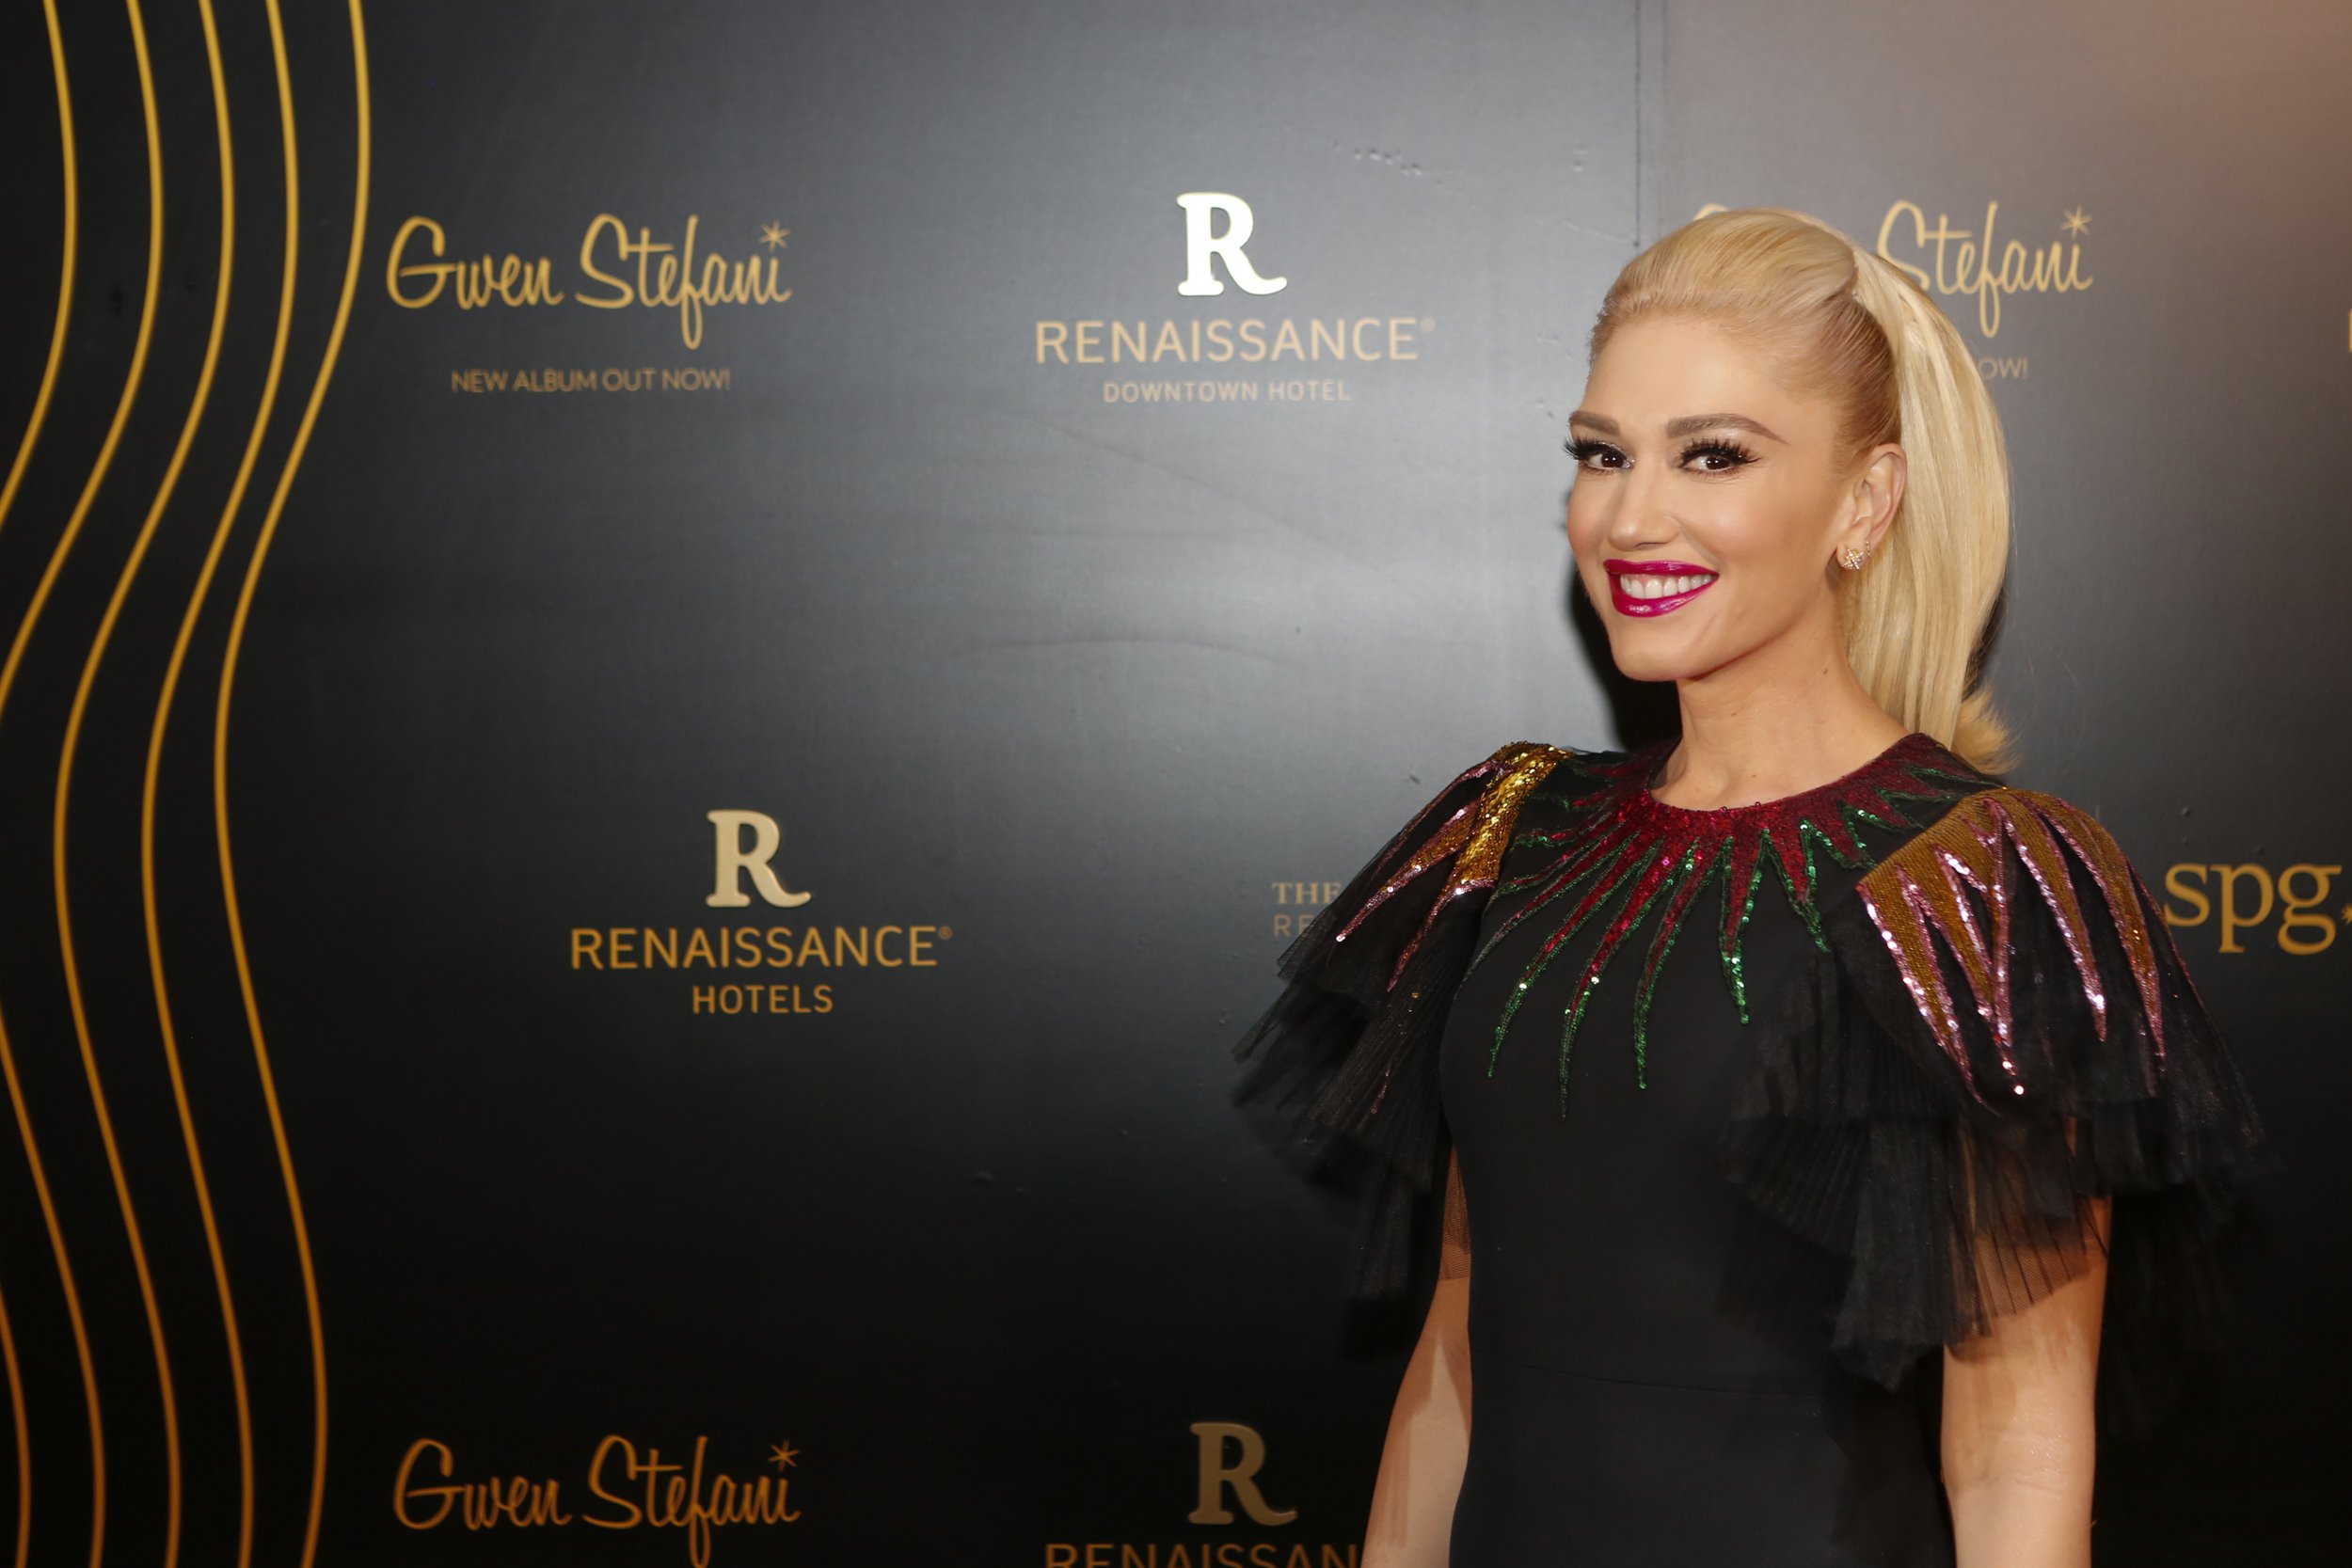 Gwen Stefani attends the opening of the Renaissance Downtown Hotel, Dubai on December 4, 2017 in Dubai, United Arab Emirates | Photo: Getty Images